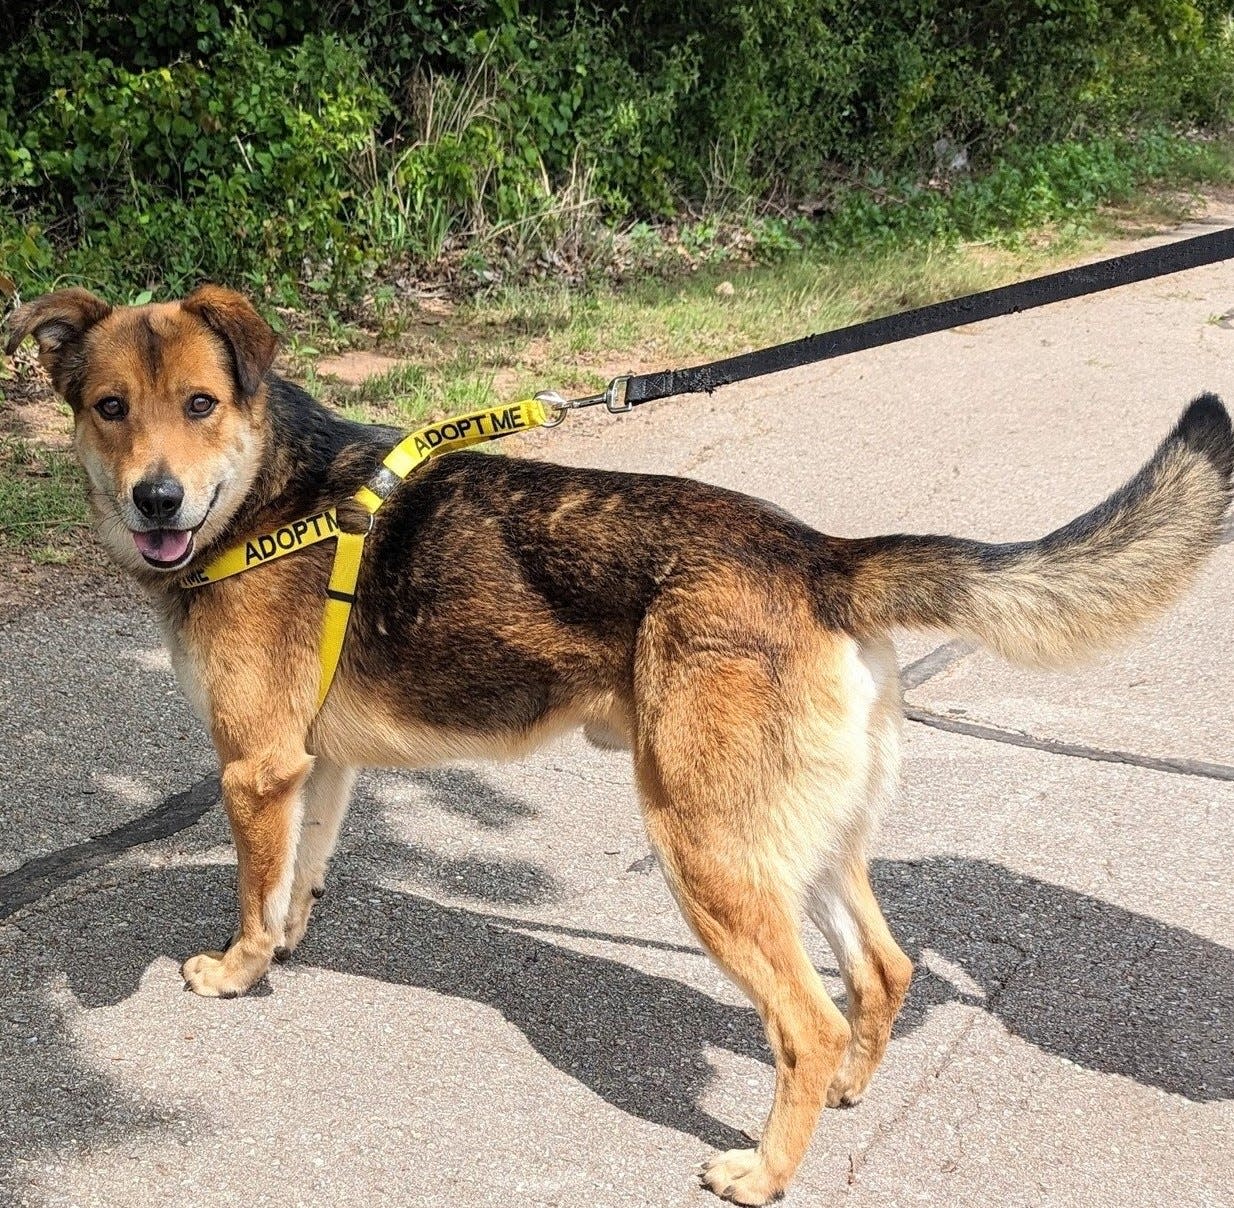 Riley, ID #427933, came into the shelter as a stray on March 21. He's always ready for a walk or a game of Frisbee. Riley is a sweet and cuddly 3-year-old, 65-pound shepherd mix. When you call his name, he will trot right over to give you kisses and nuzzles. Adoption fees are waived for all dogs, no matter their size. To meet Riley, go to the Oklahoma City Animal Shelter at 2811 SE 29 between noon and 5 p.m. Tuesday through Saturday. Go online to www.okc.gov or www.okc.petfinder.com to see all the cats and dogs available for adoption.